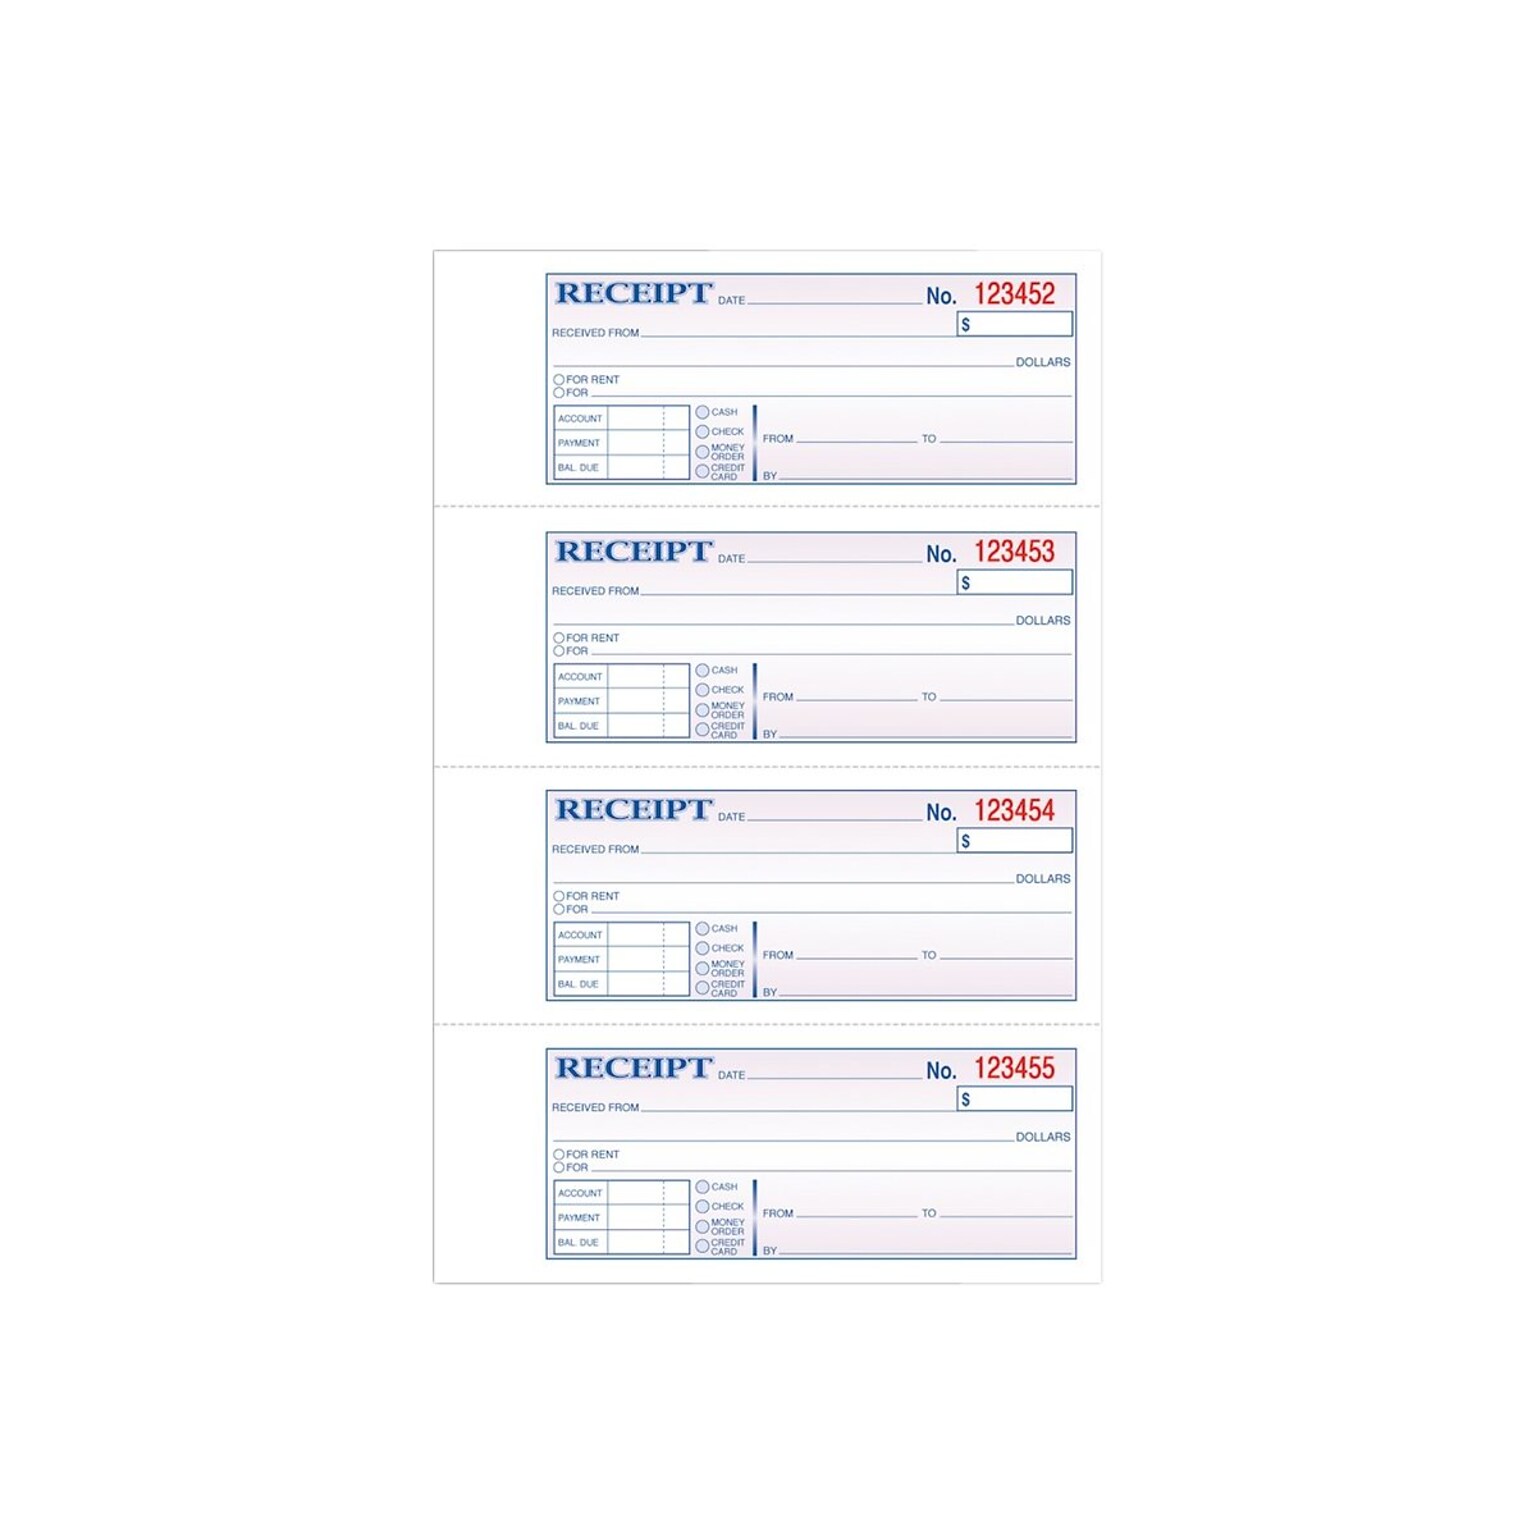 TOPS 2-Part Carbonless Receipts Book, 2.75L x 7.13W, 200 Forms/Book, Each (TOP 46806)